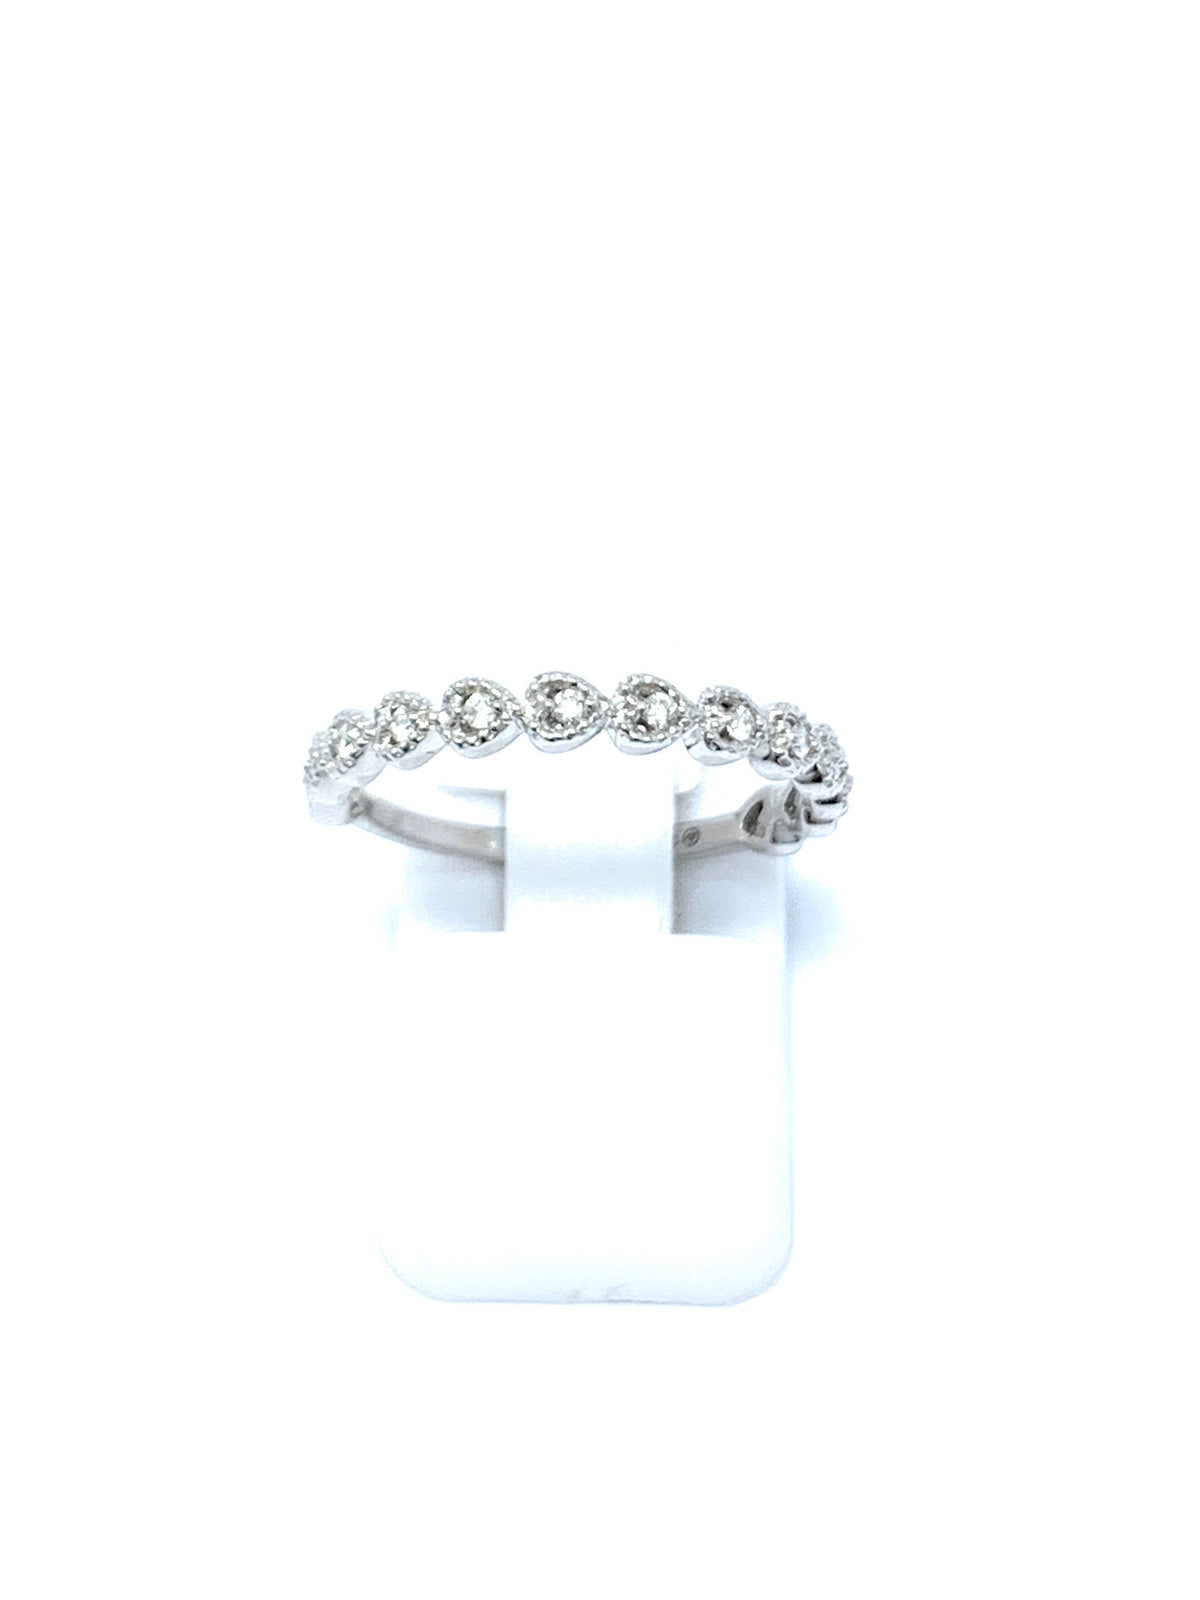 White Gold Heart and Diamond Ring